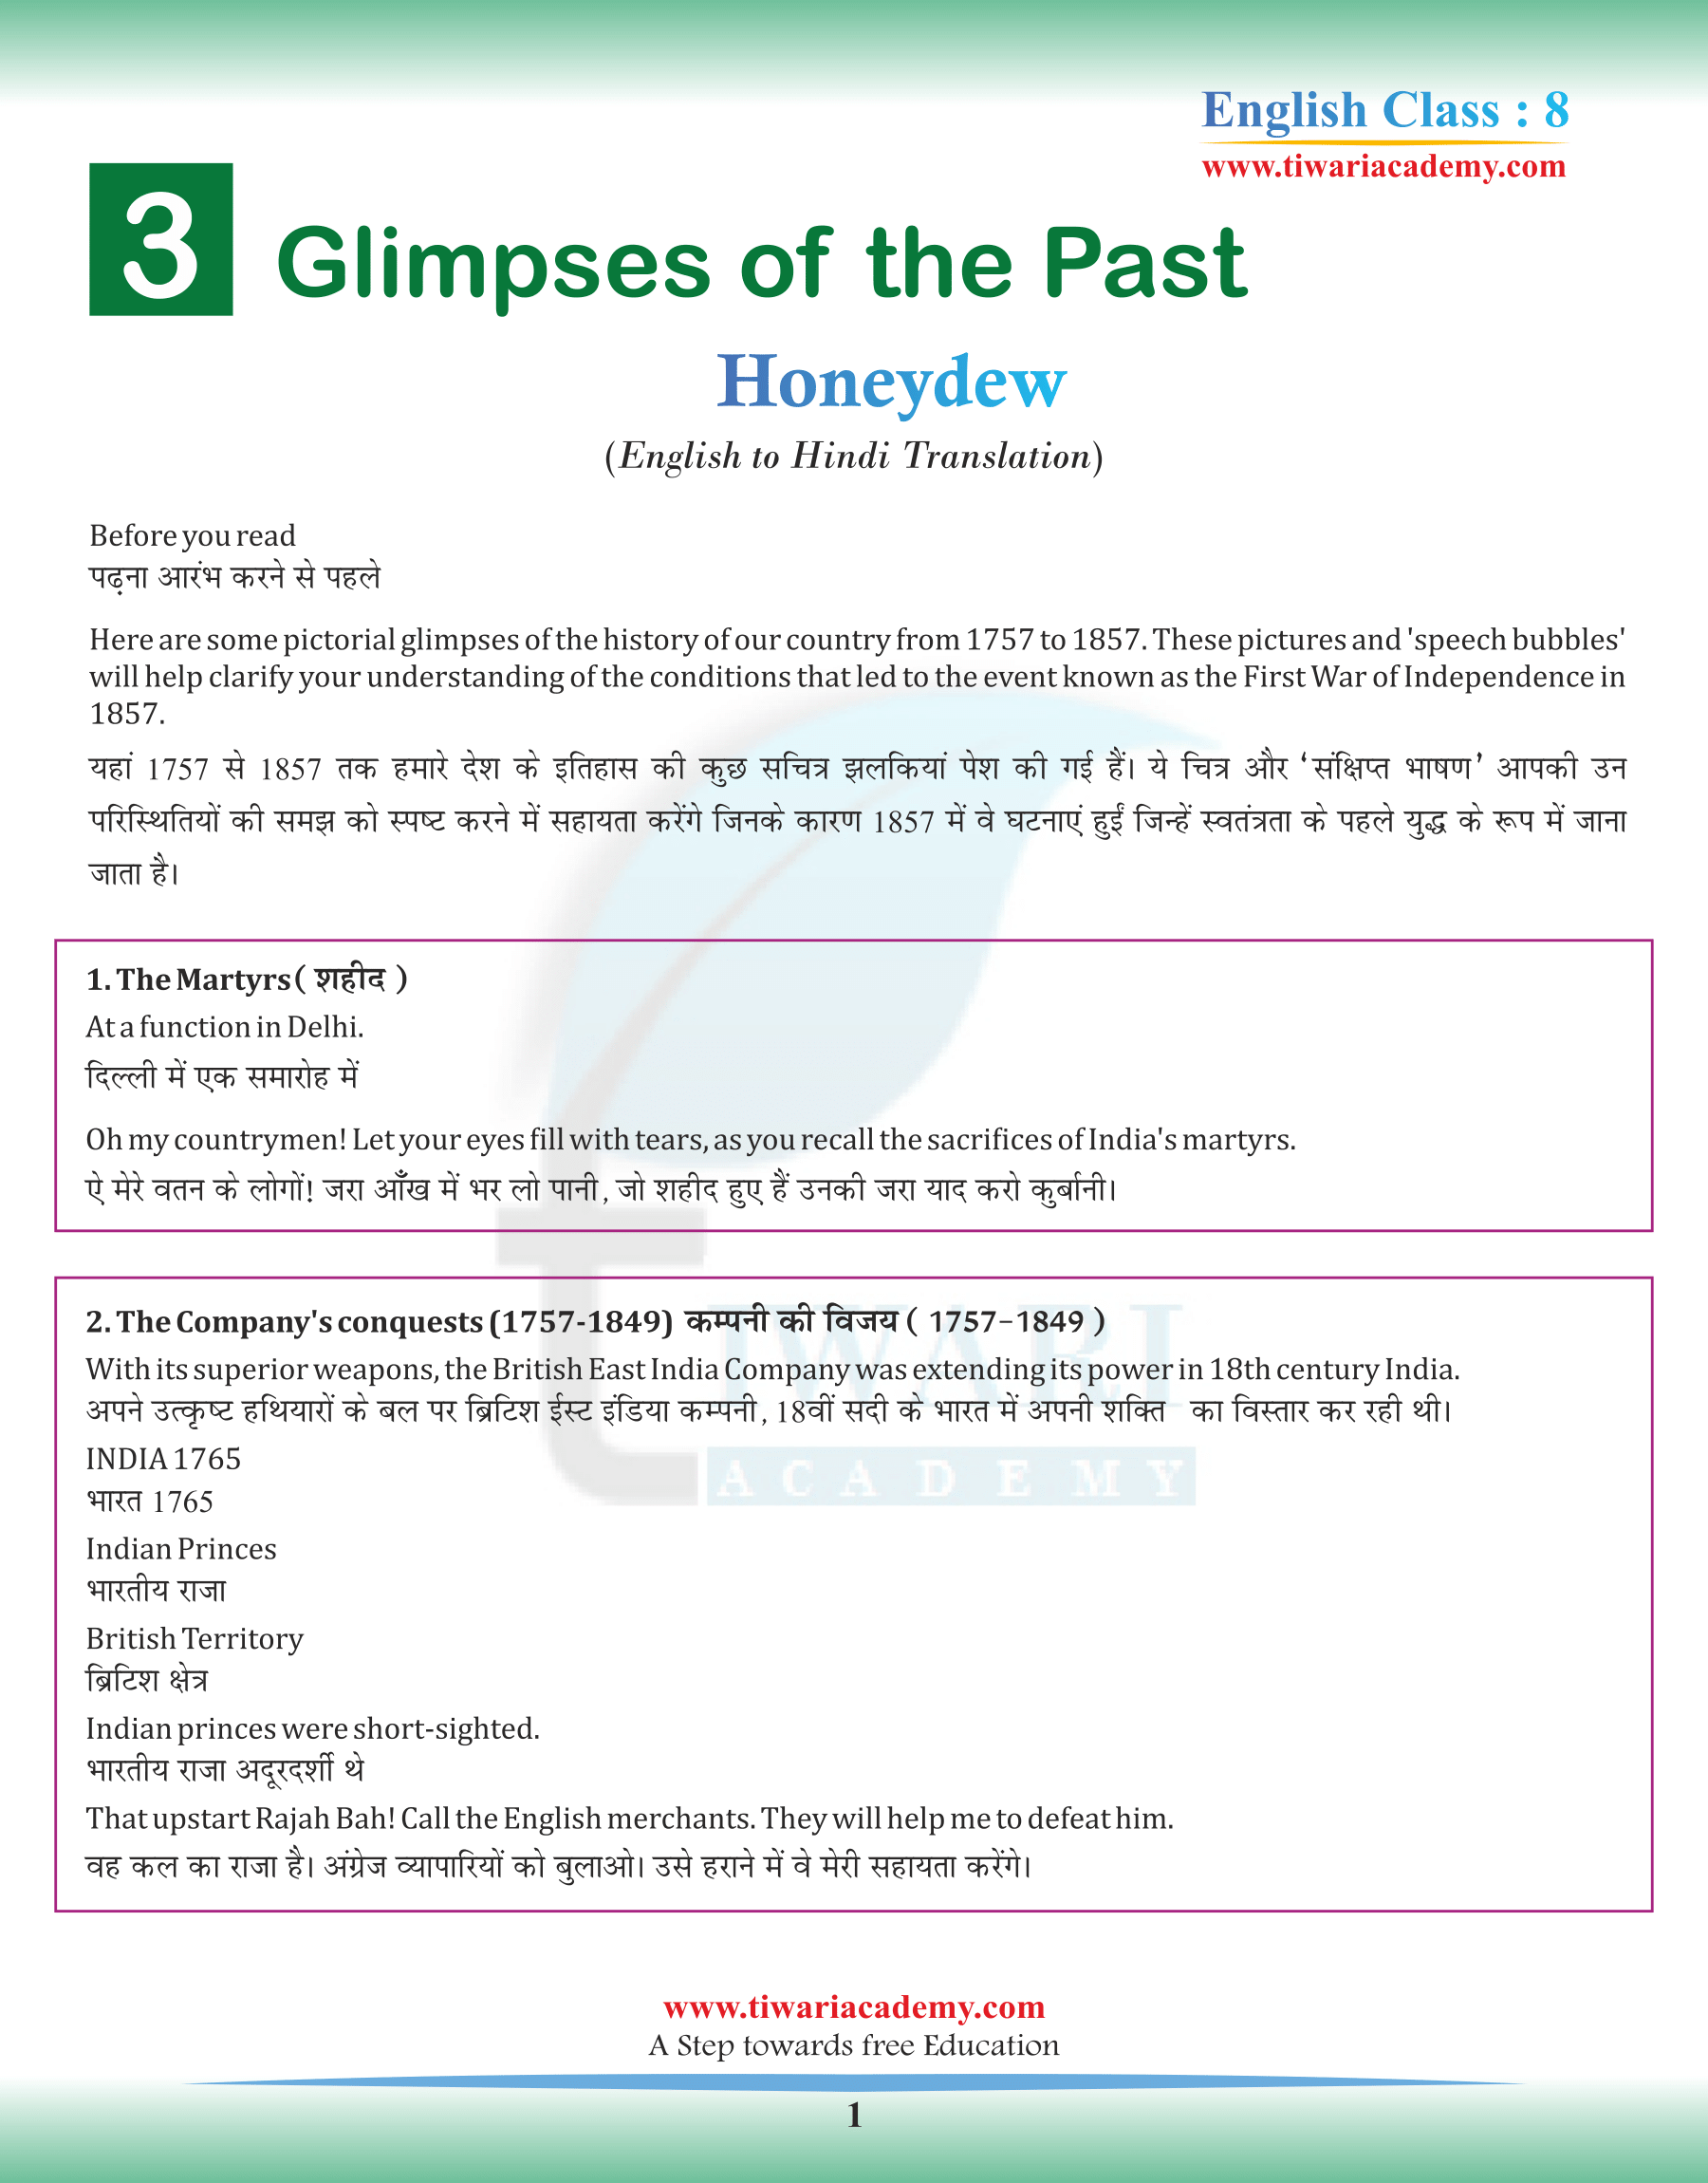 Class 8 English Honeydew Chapter 3 Glimpses of the Past in Hindi